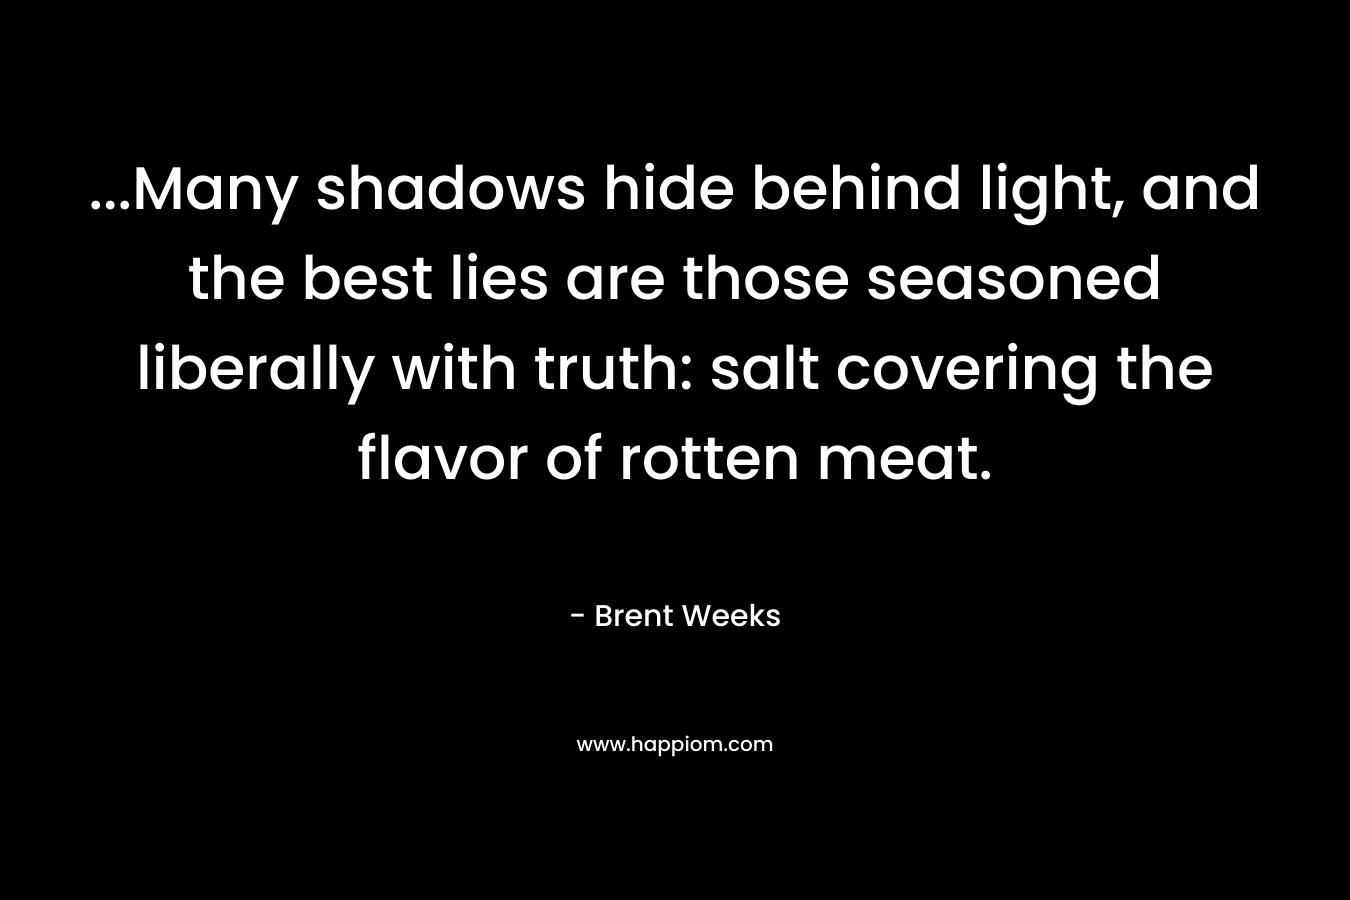 …Many shadows hide behind light, and the best lies are those seasoned liberally with truth: salt covering the flavor of rotten meat. – Brent Weeks